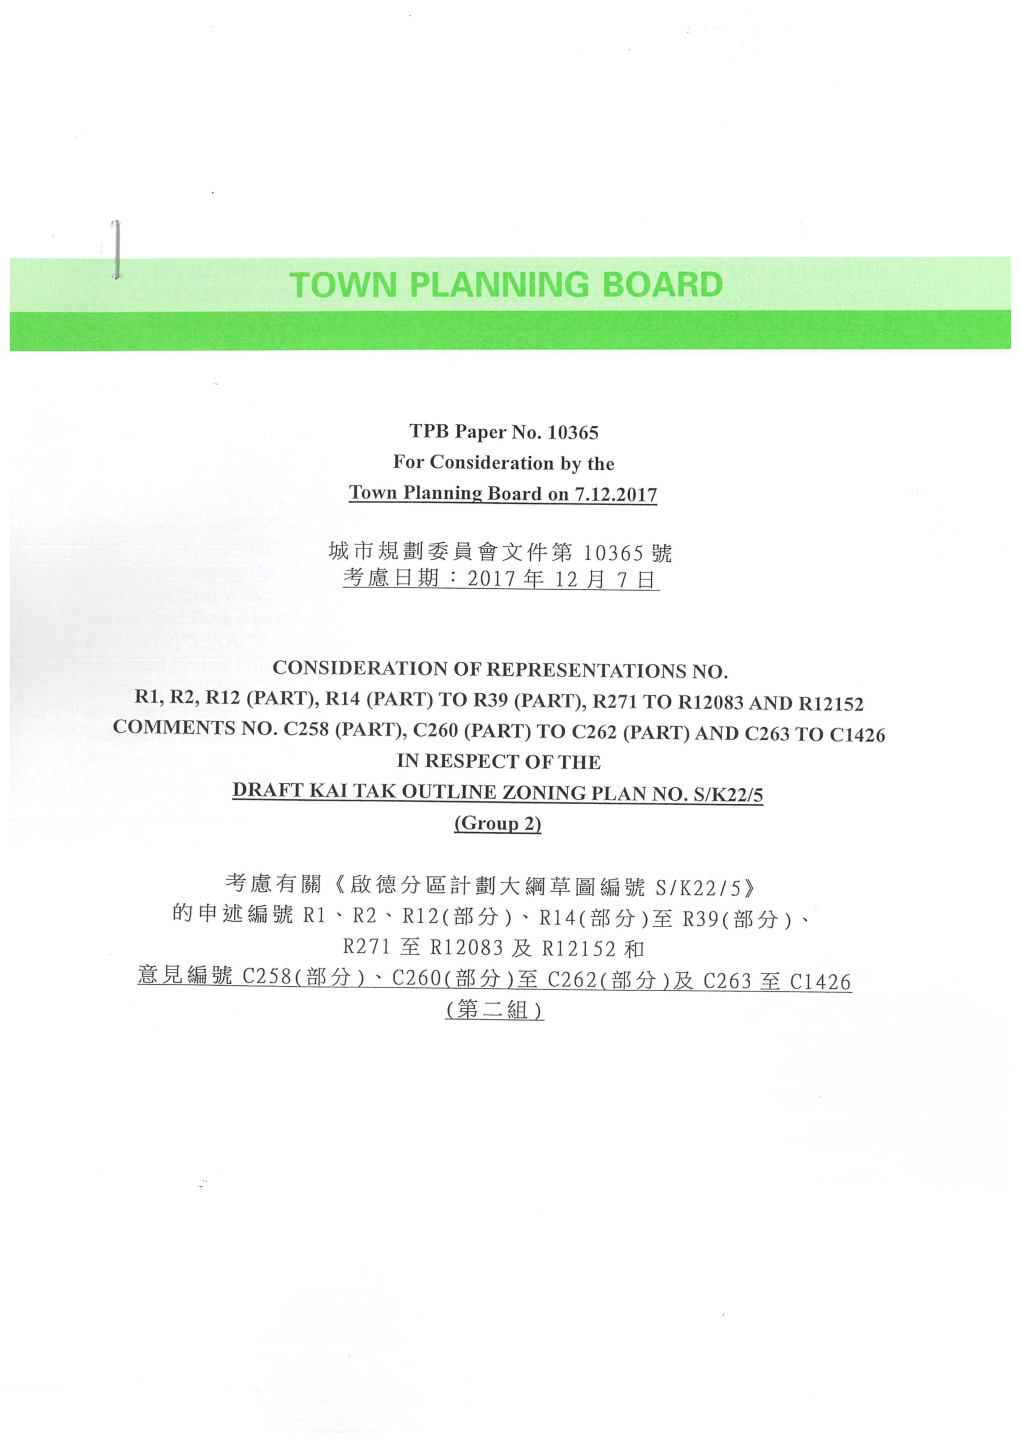 Town Planning Board Paper No. 10365